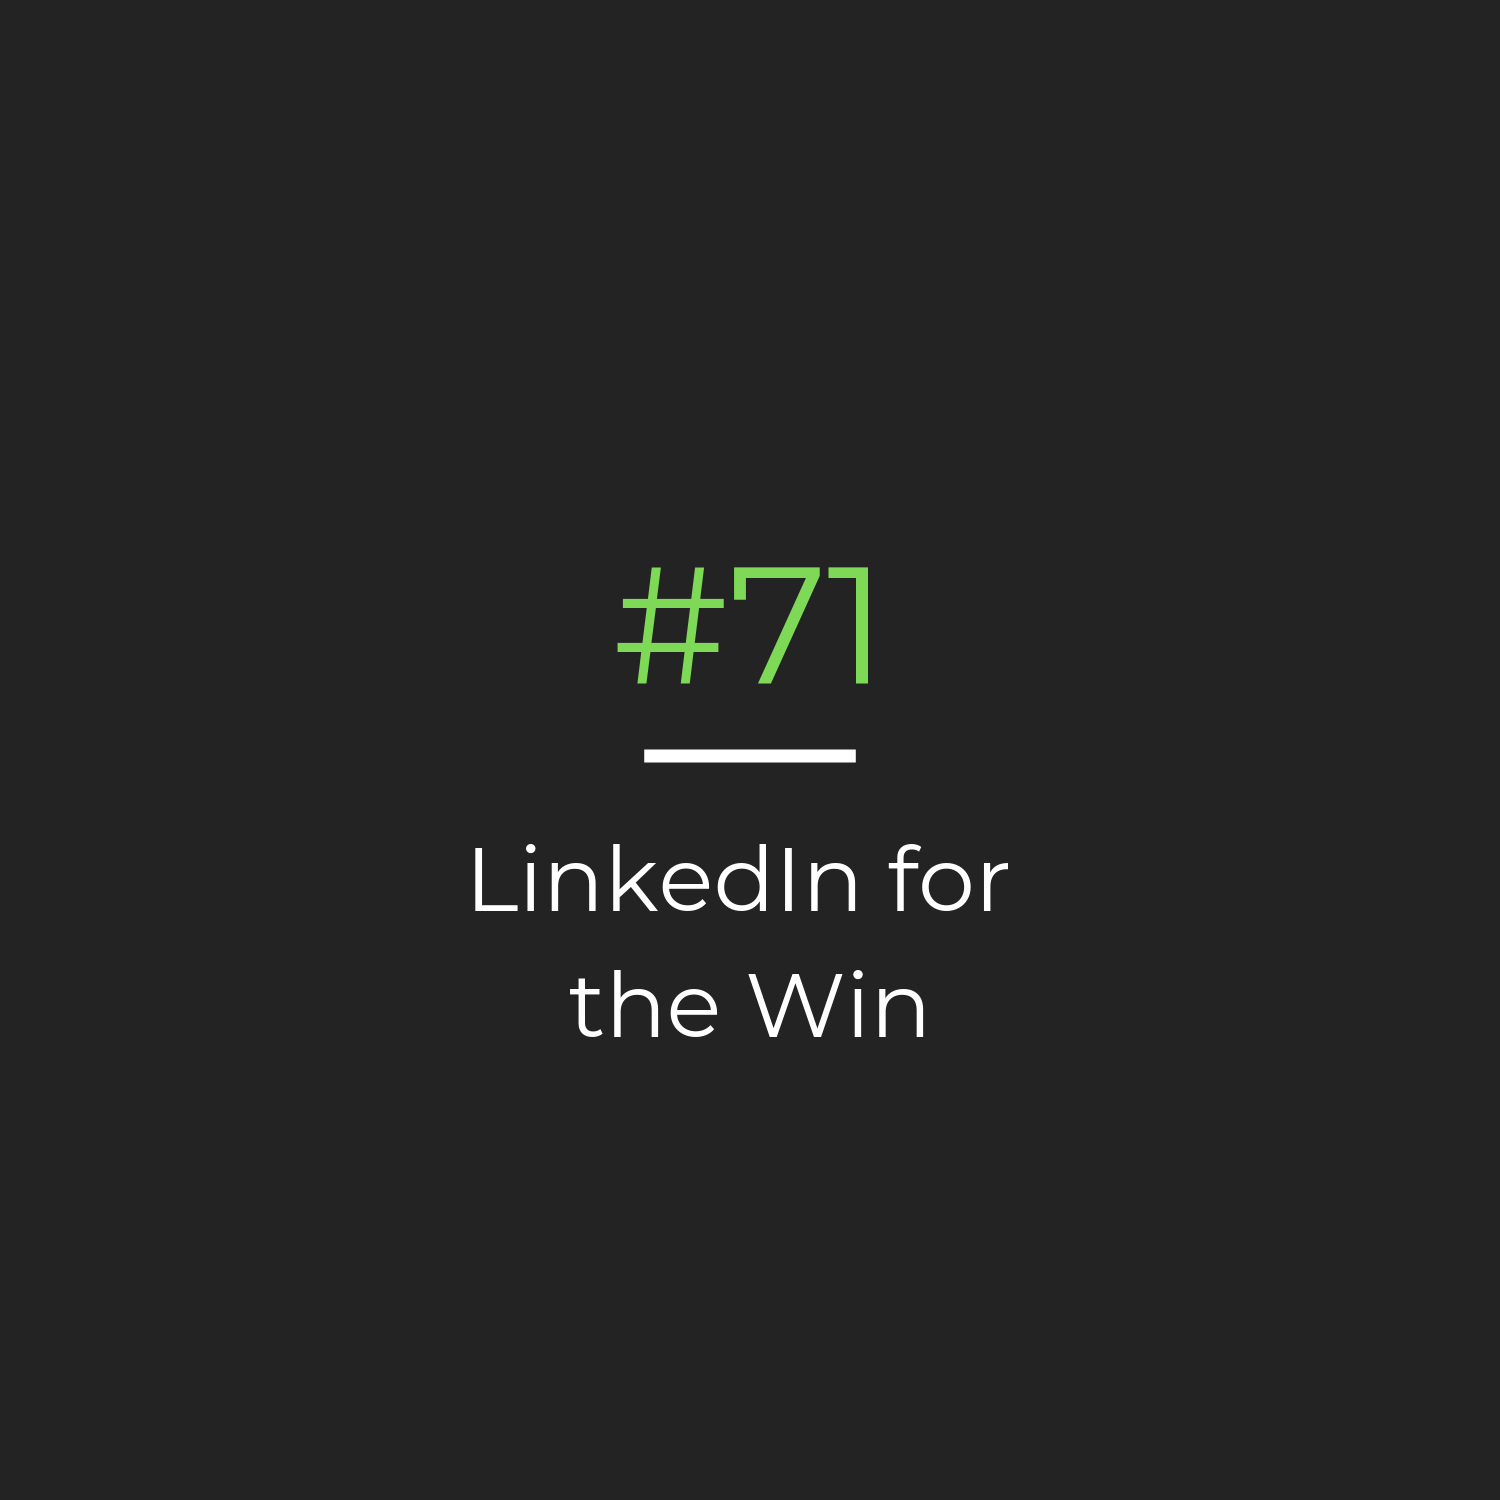 Edition #71: LinkedIn for the Win